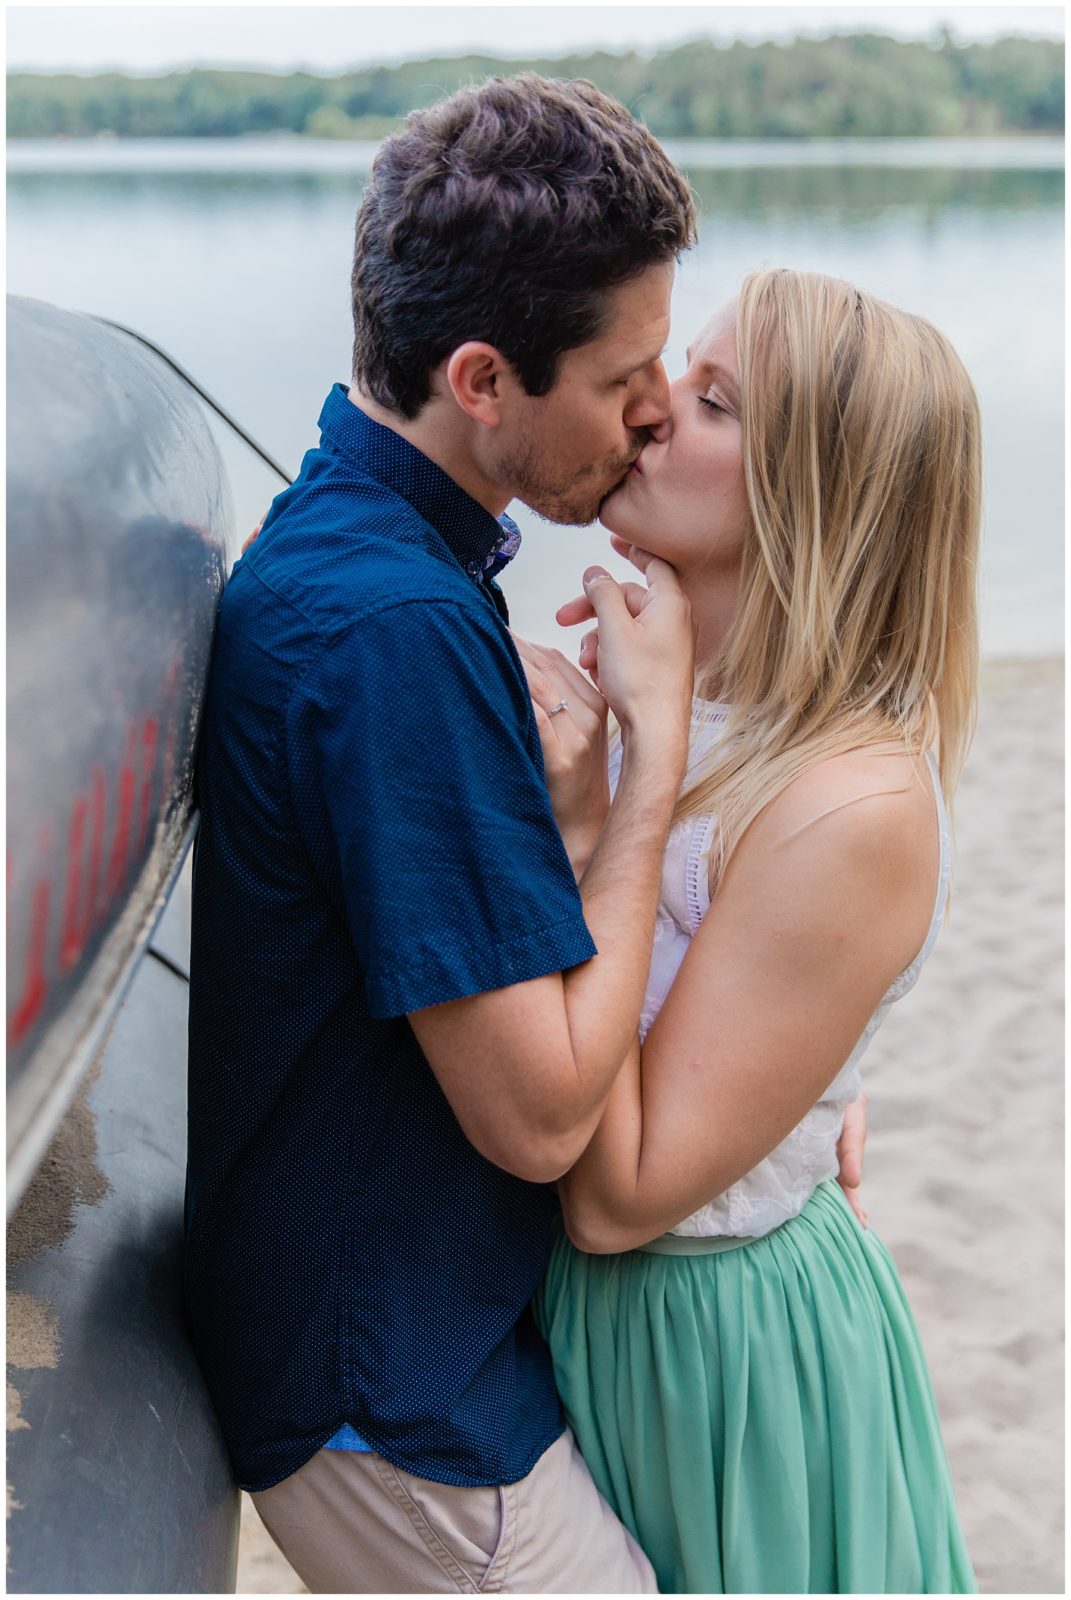 Summer Camp Engagement Session in Wisconsin | Happy Takes Photography 